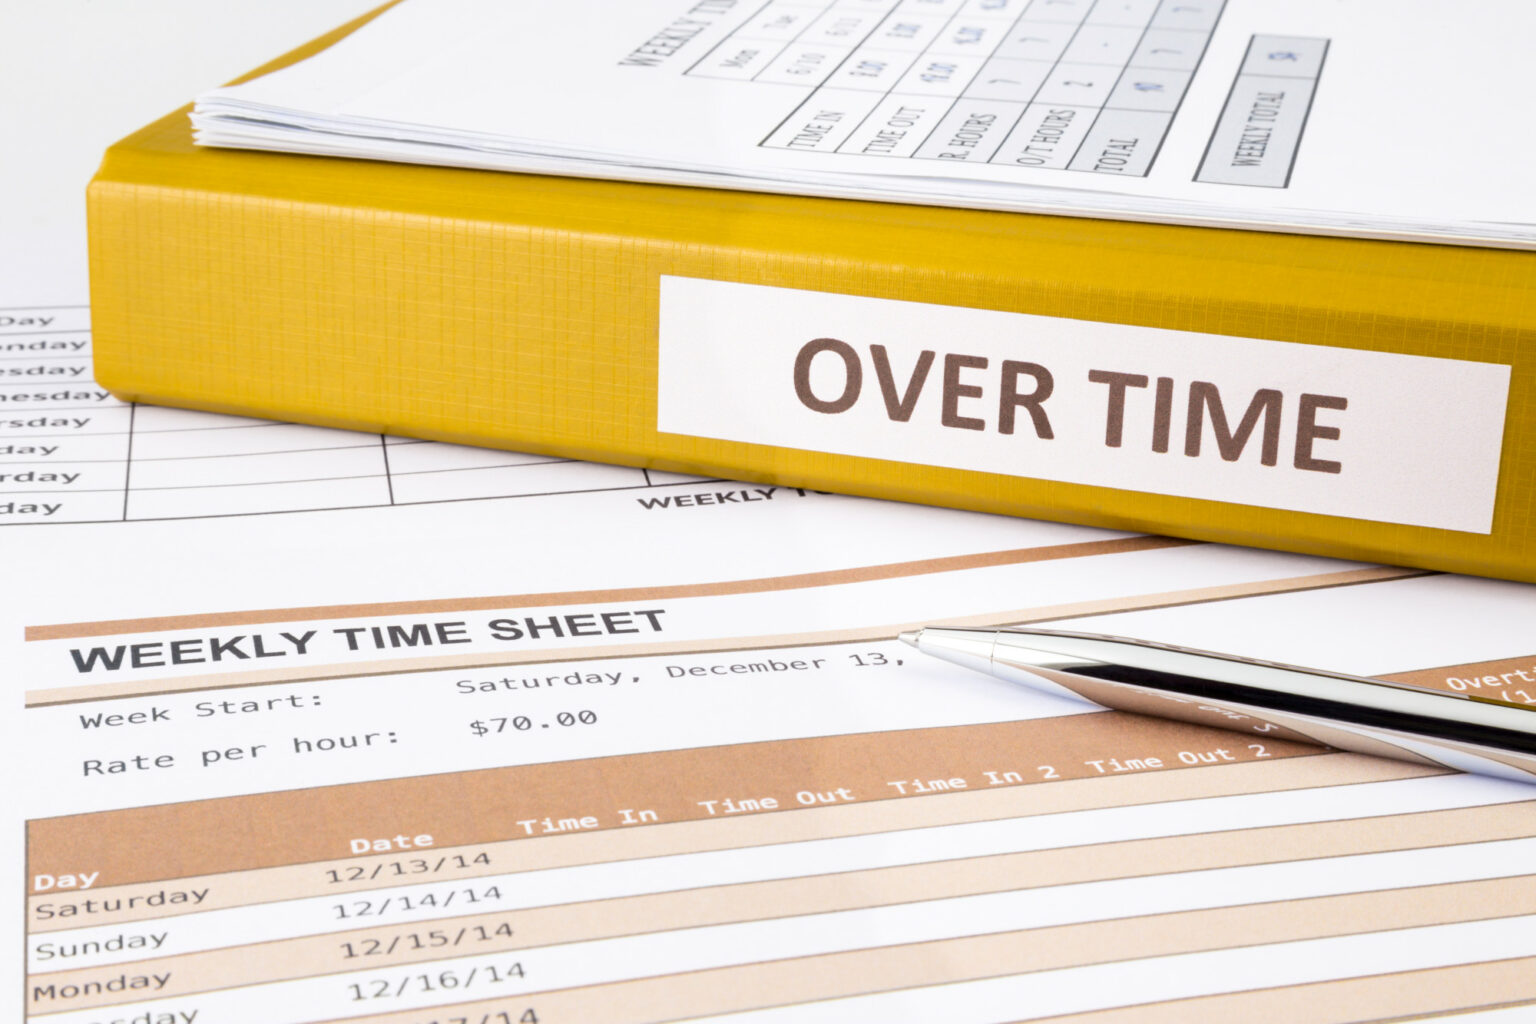 A Quick Guide to State Overtime Laws